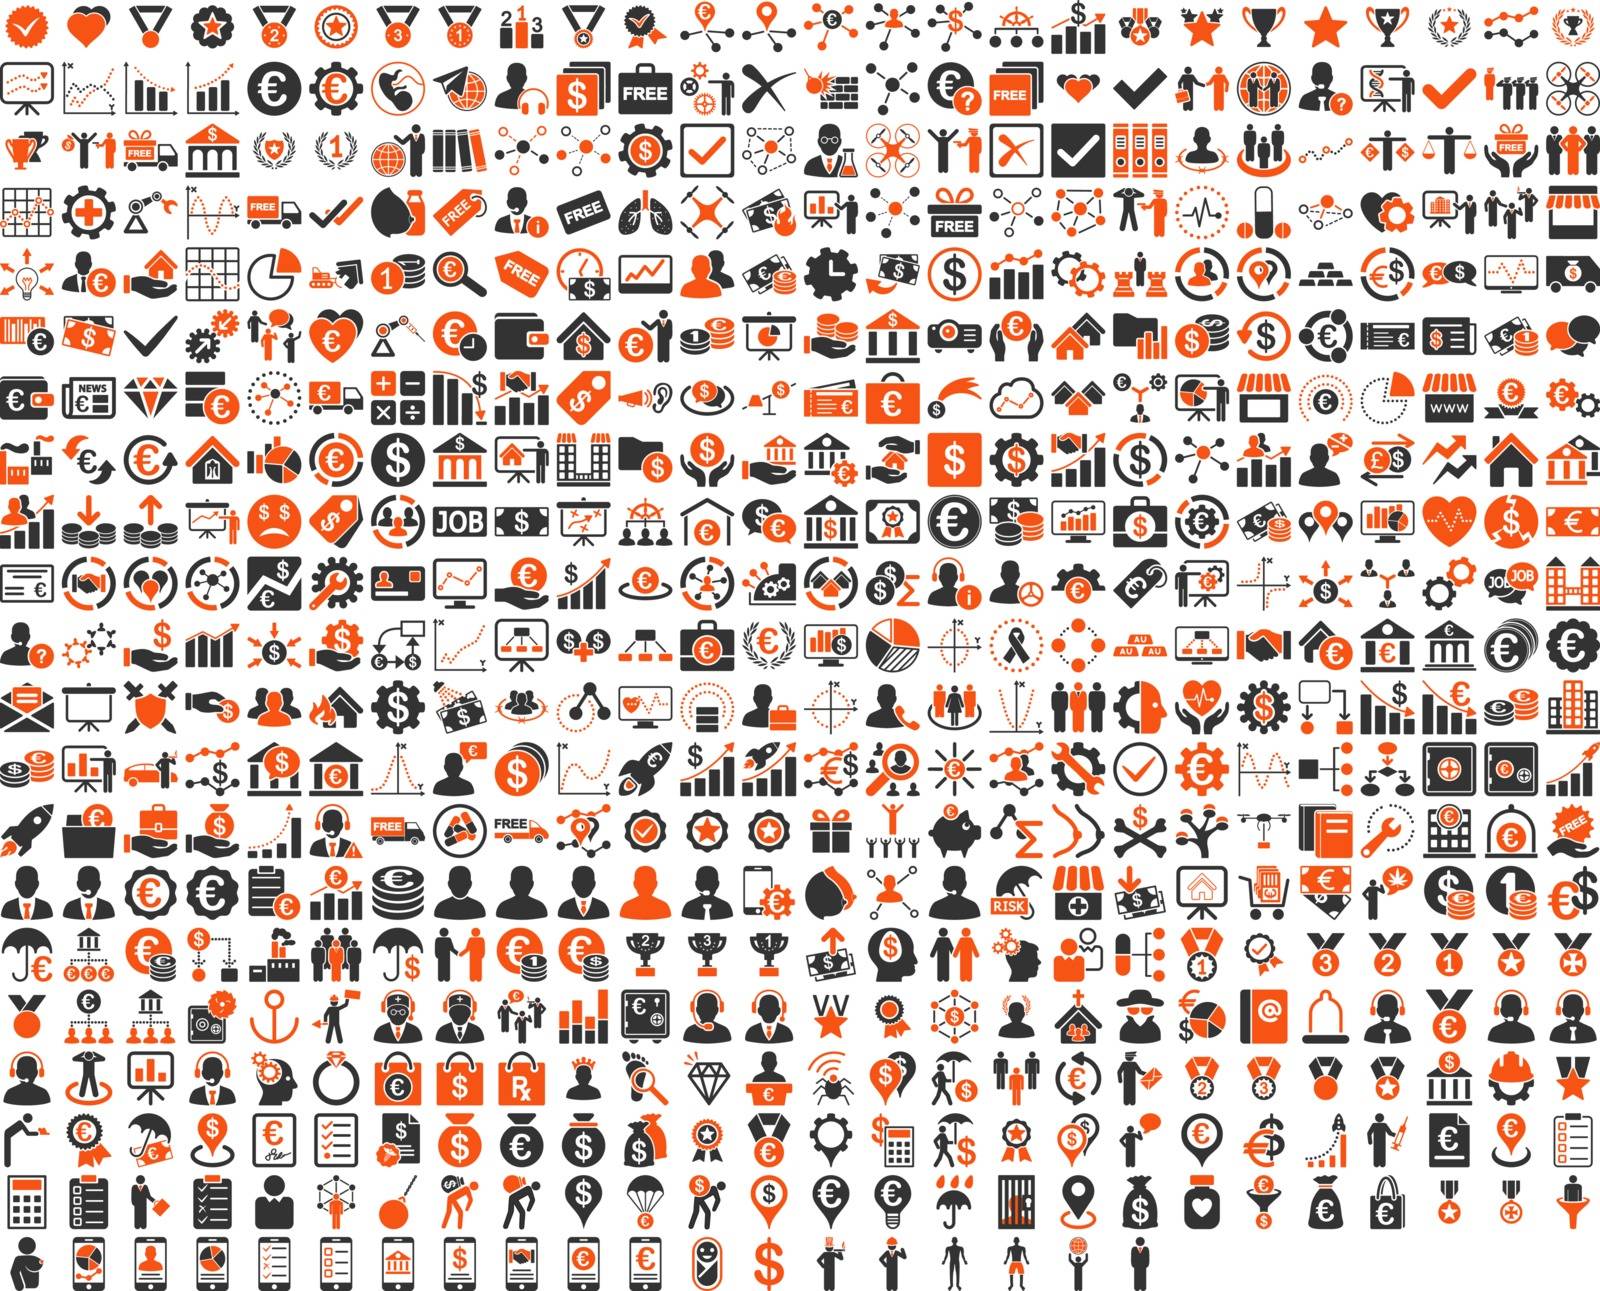 Application Toolbar Icons. 576 flat bicolor icons use orange and gray colors. Vector images are isolated on a white background. 